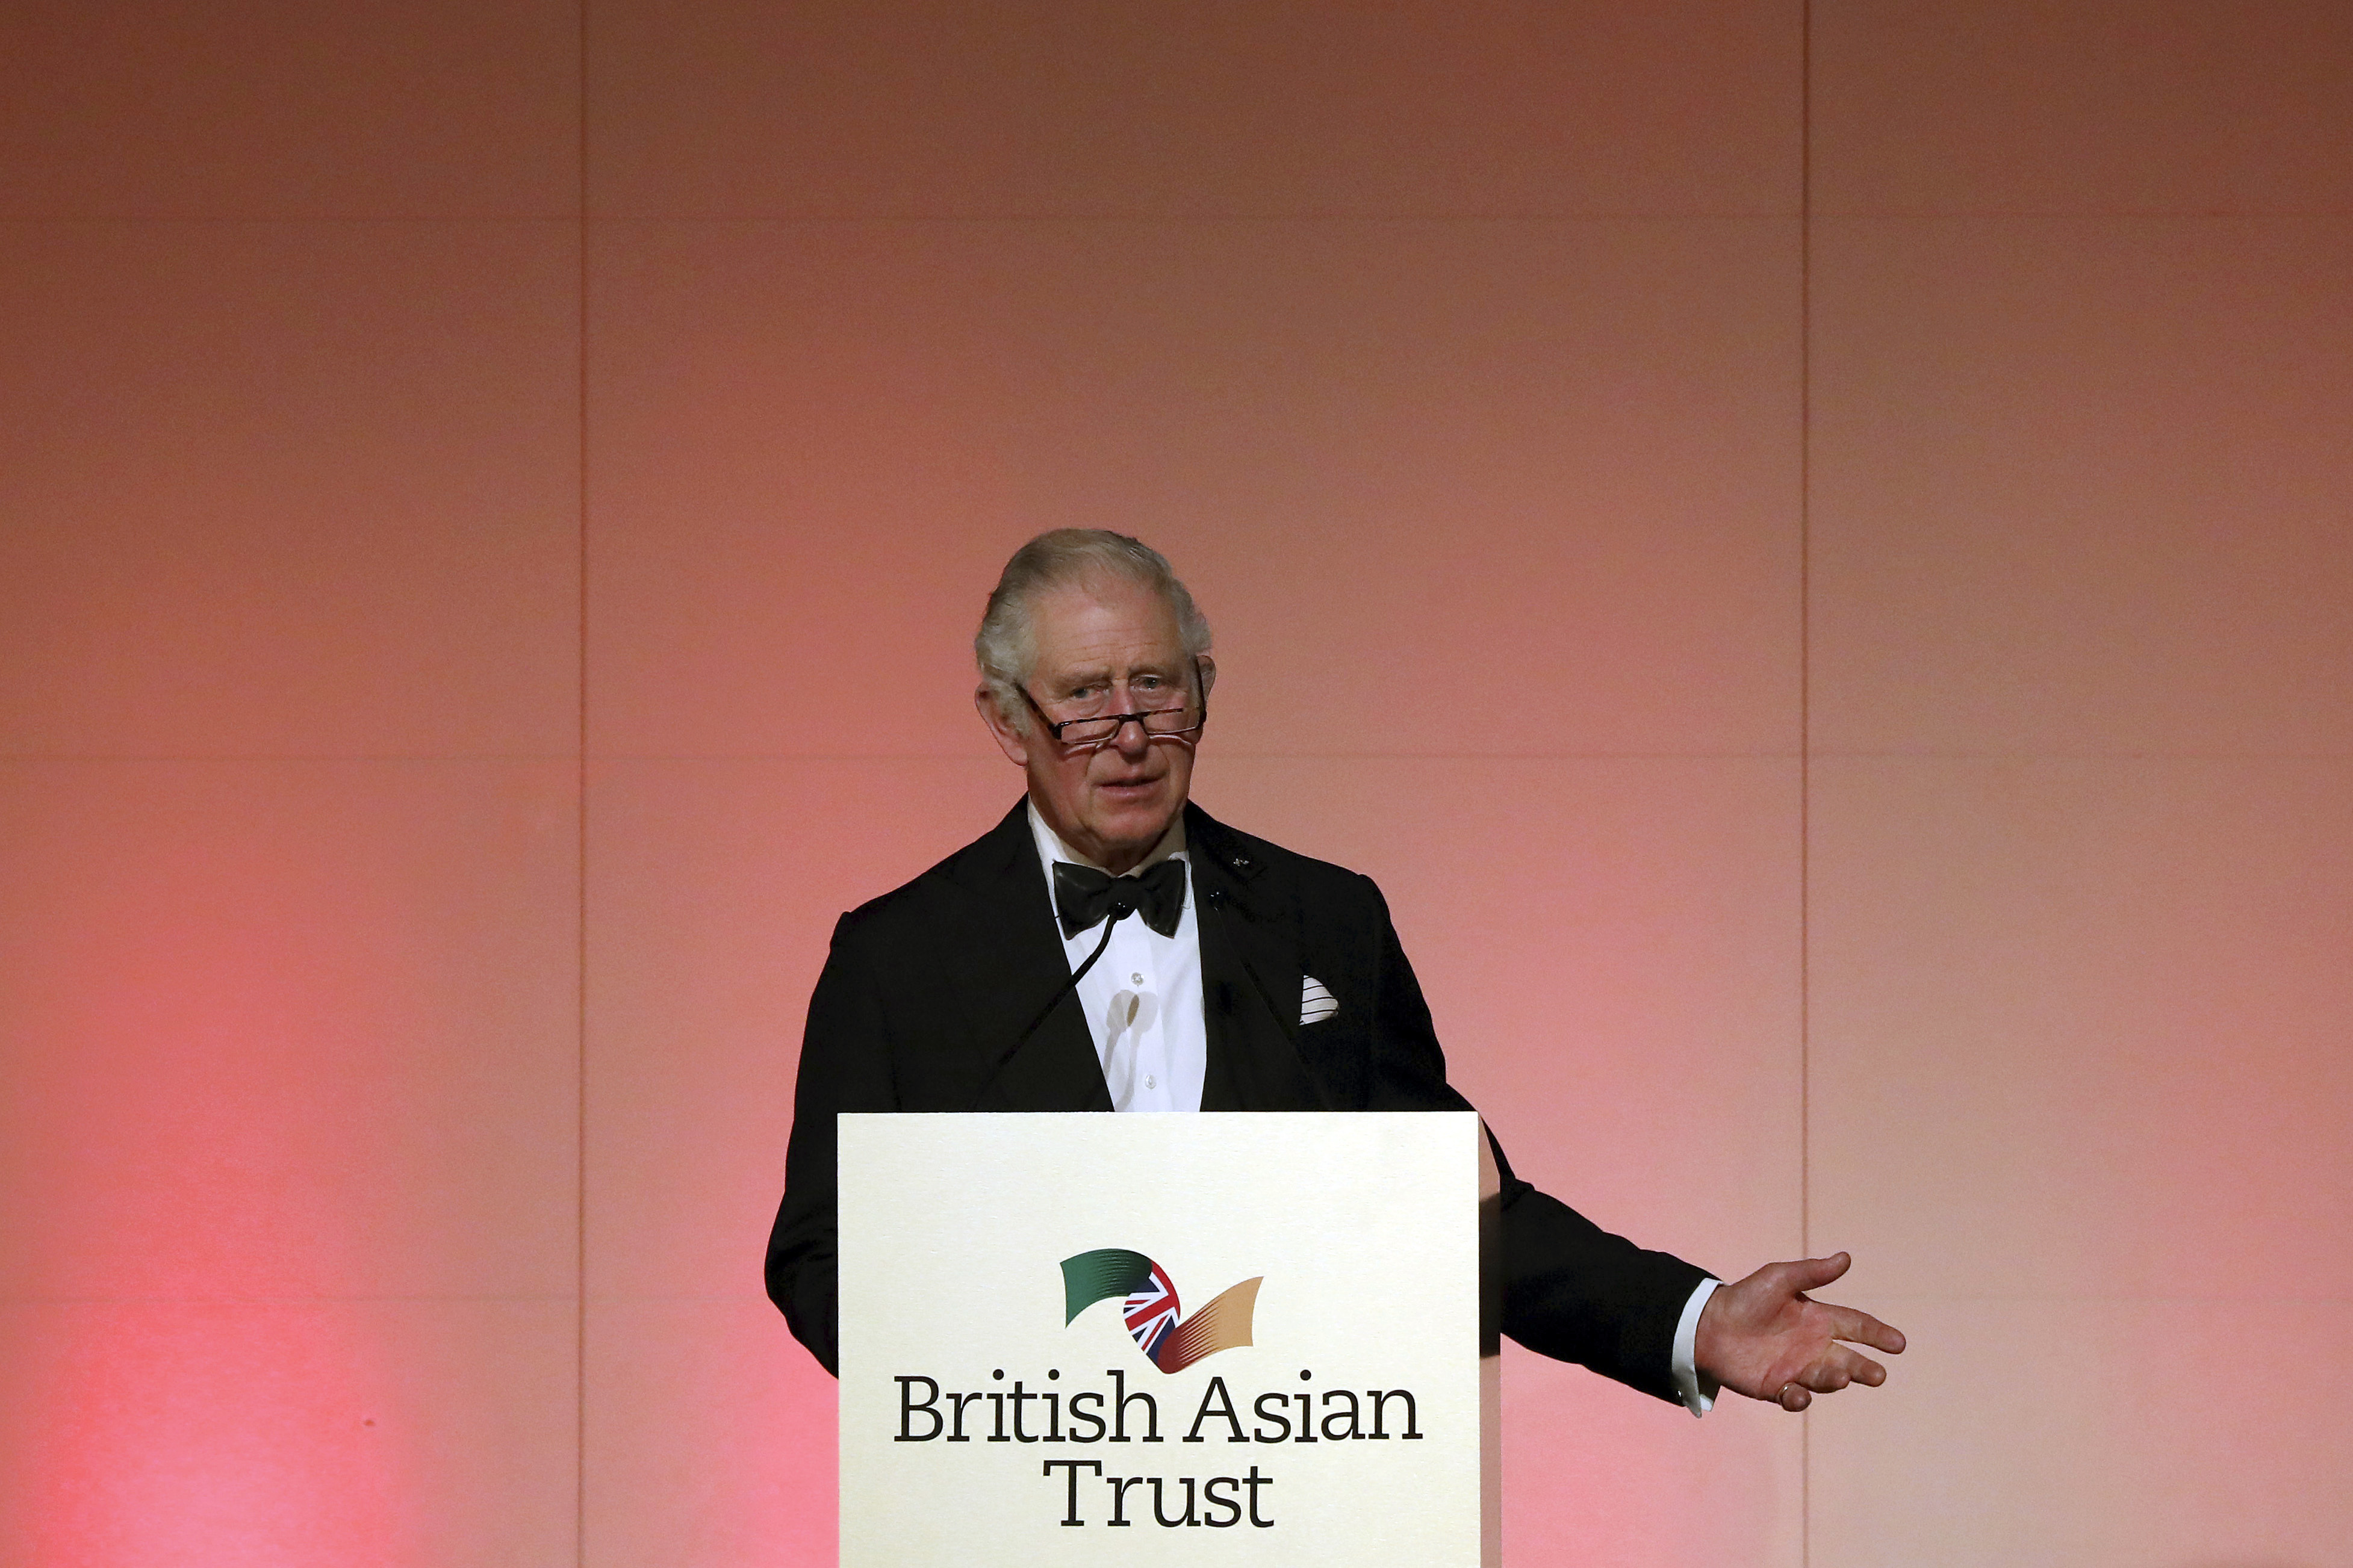 Prince Charles, Prince of Wales speaks at a reception to celebrate the British Asian Trust at The British Museum on February 09, 2022 in London, England. 